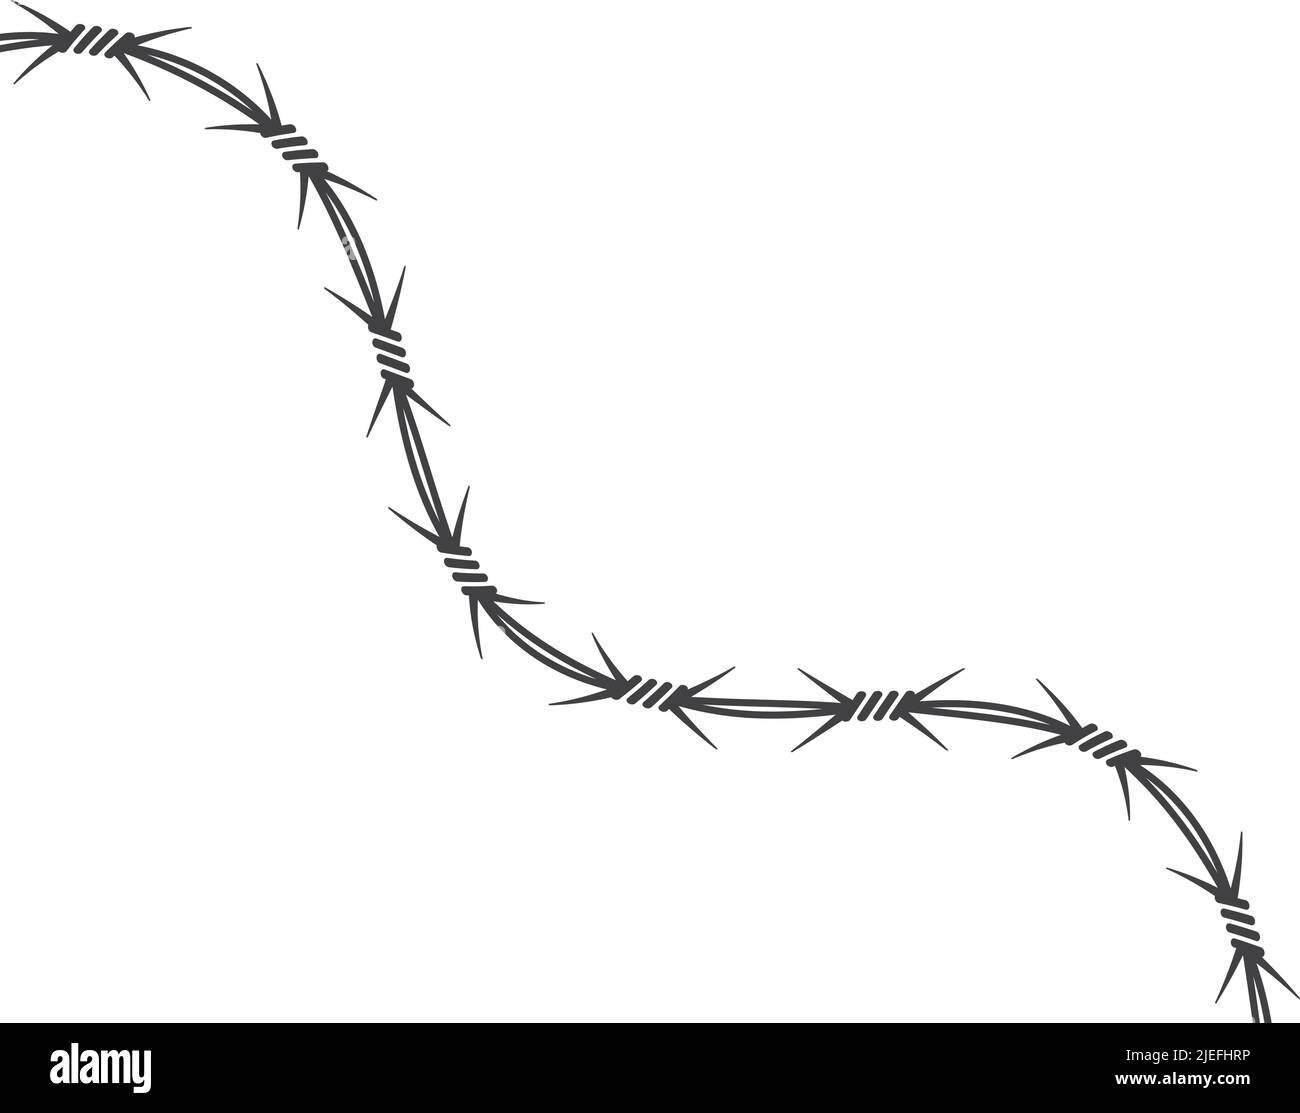 barbed wire vector illustration design template Stock Vector